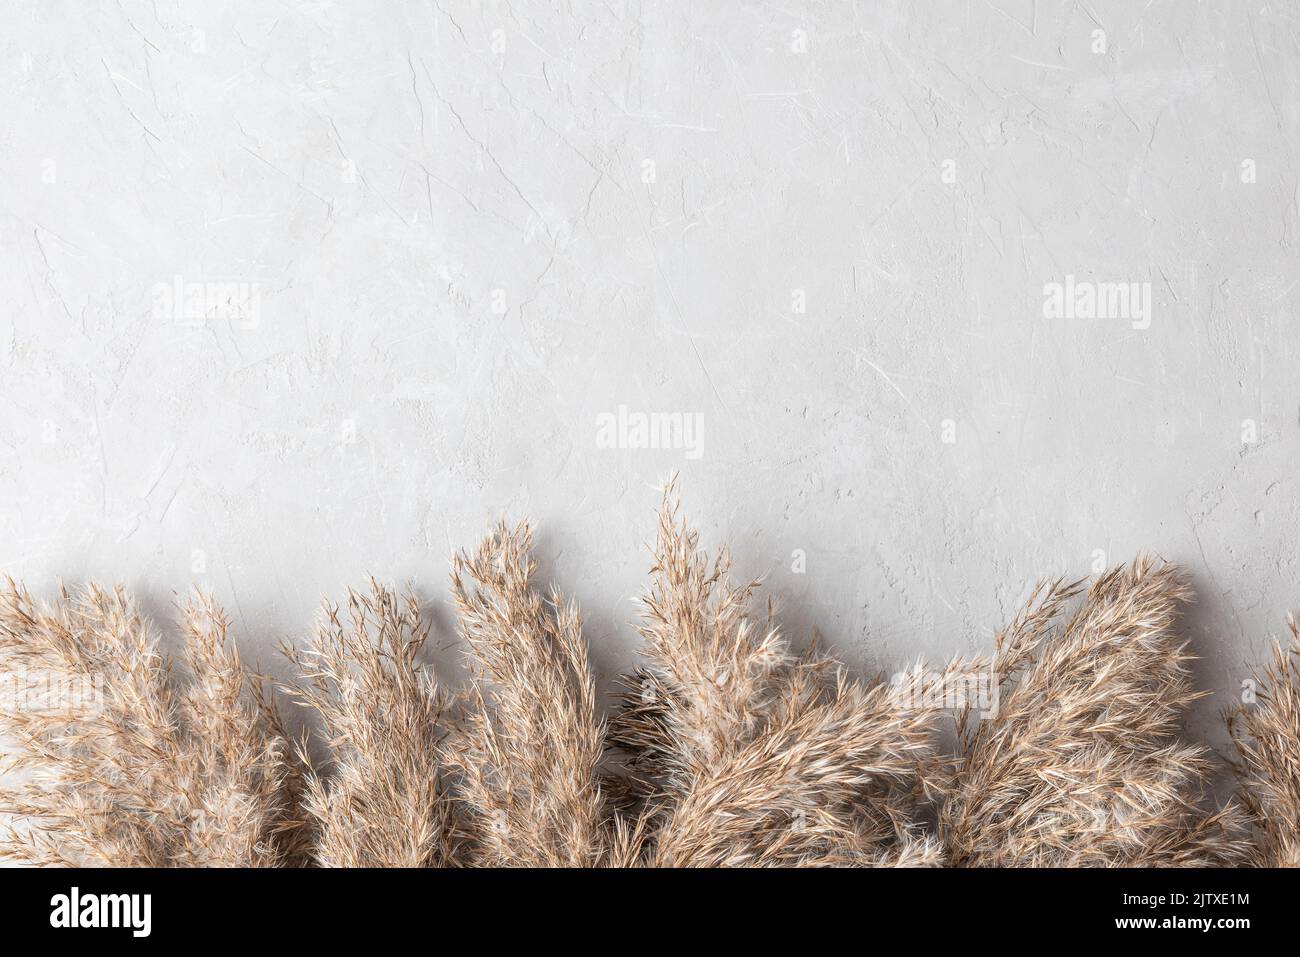 Autumn background. Dry cane reeds or pampas grass on gray concrete background. Minimal, stylish concept. Flat lay. Top view with copy space Stock Photo